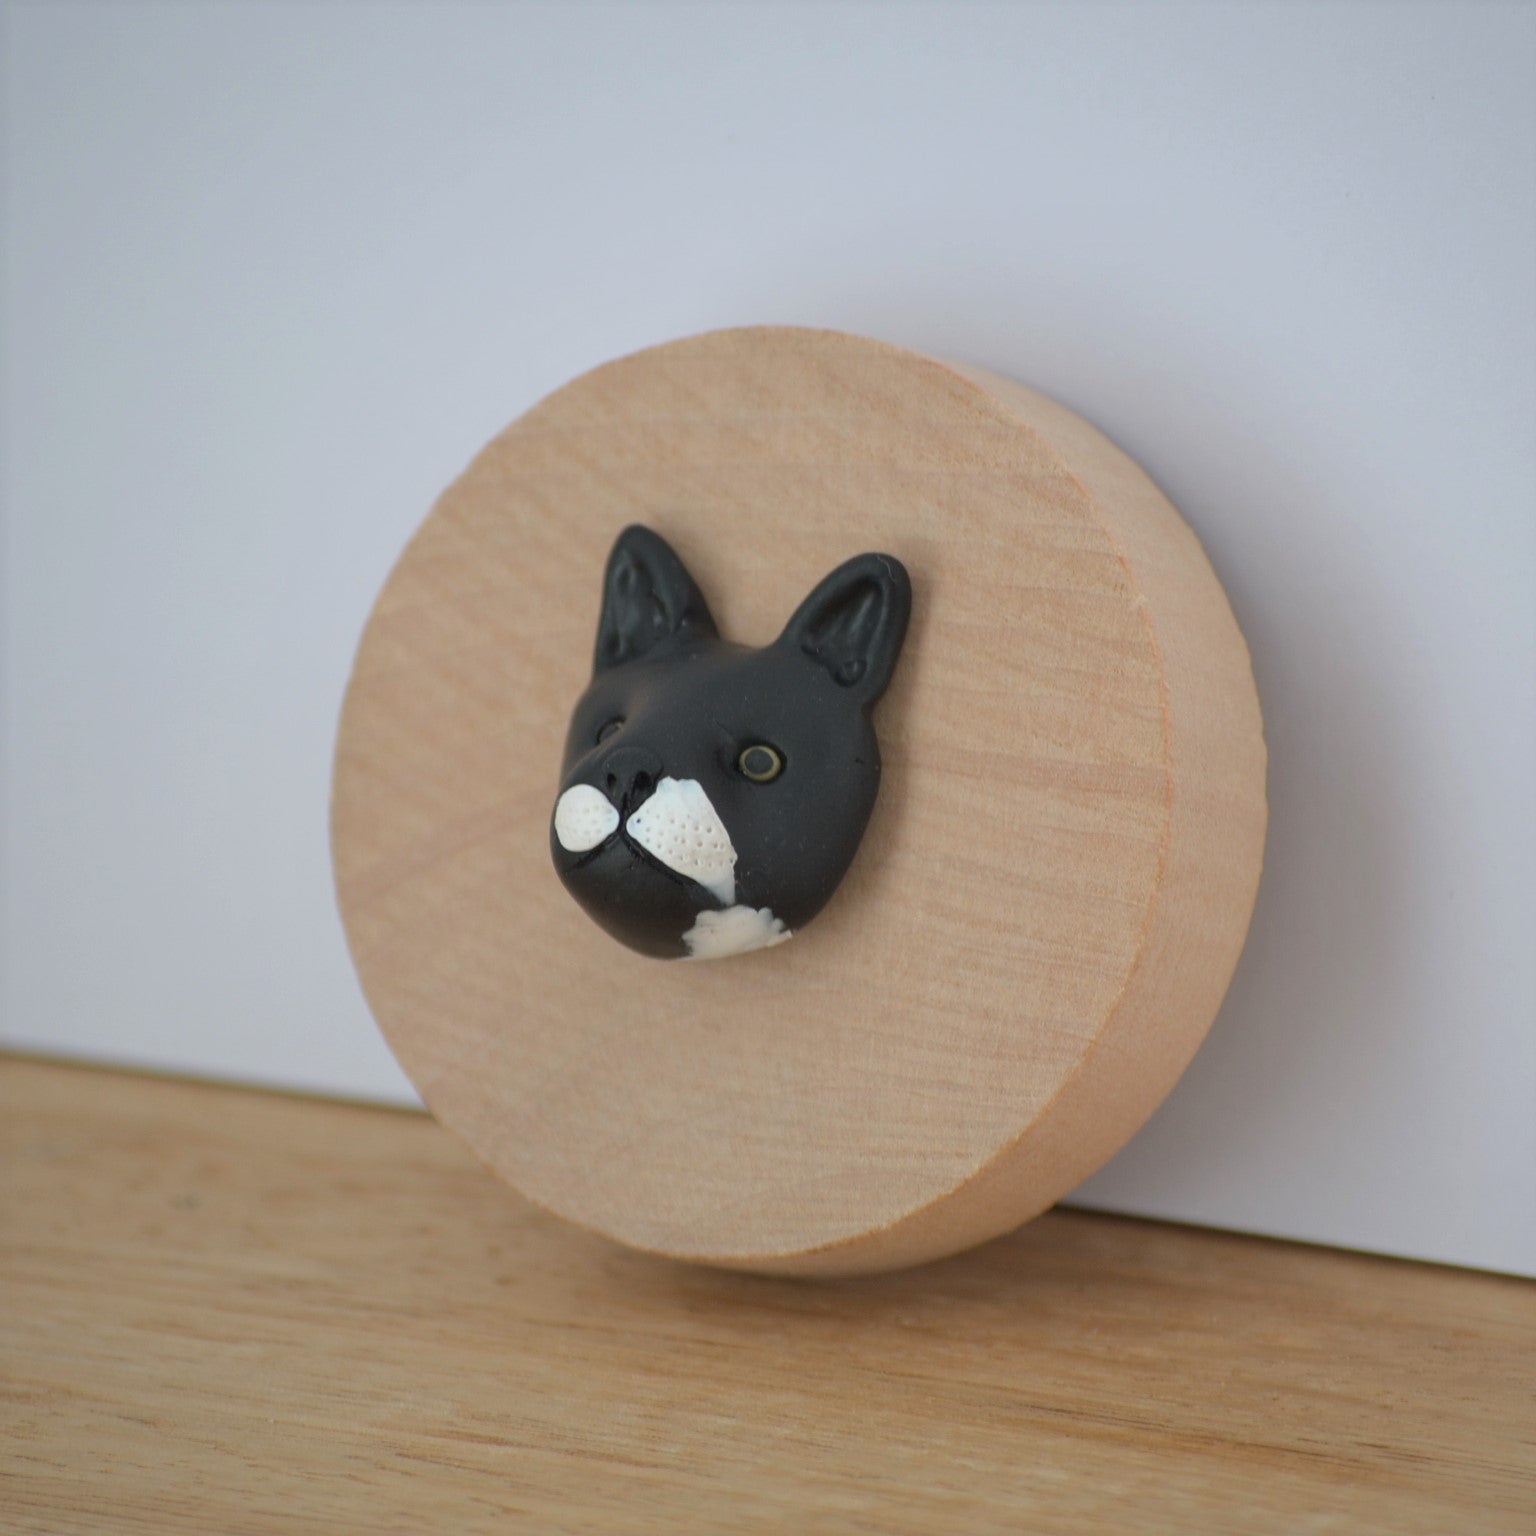 Bottle opener with custom black cat face sculpture attached